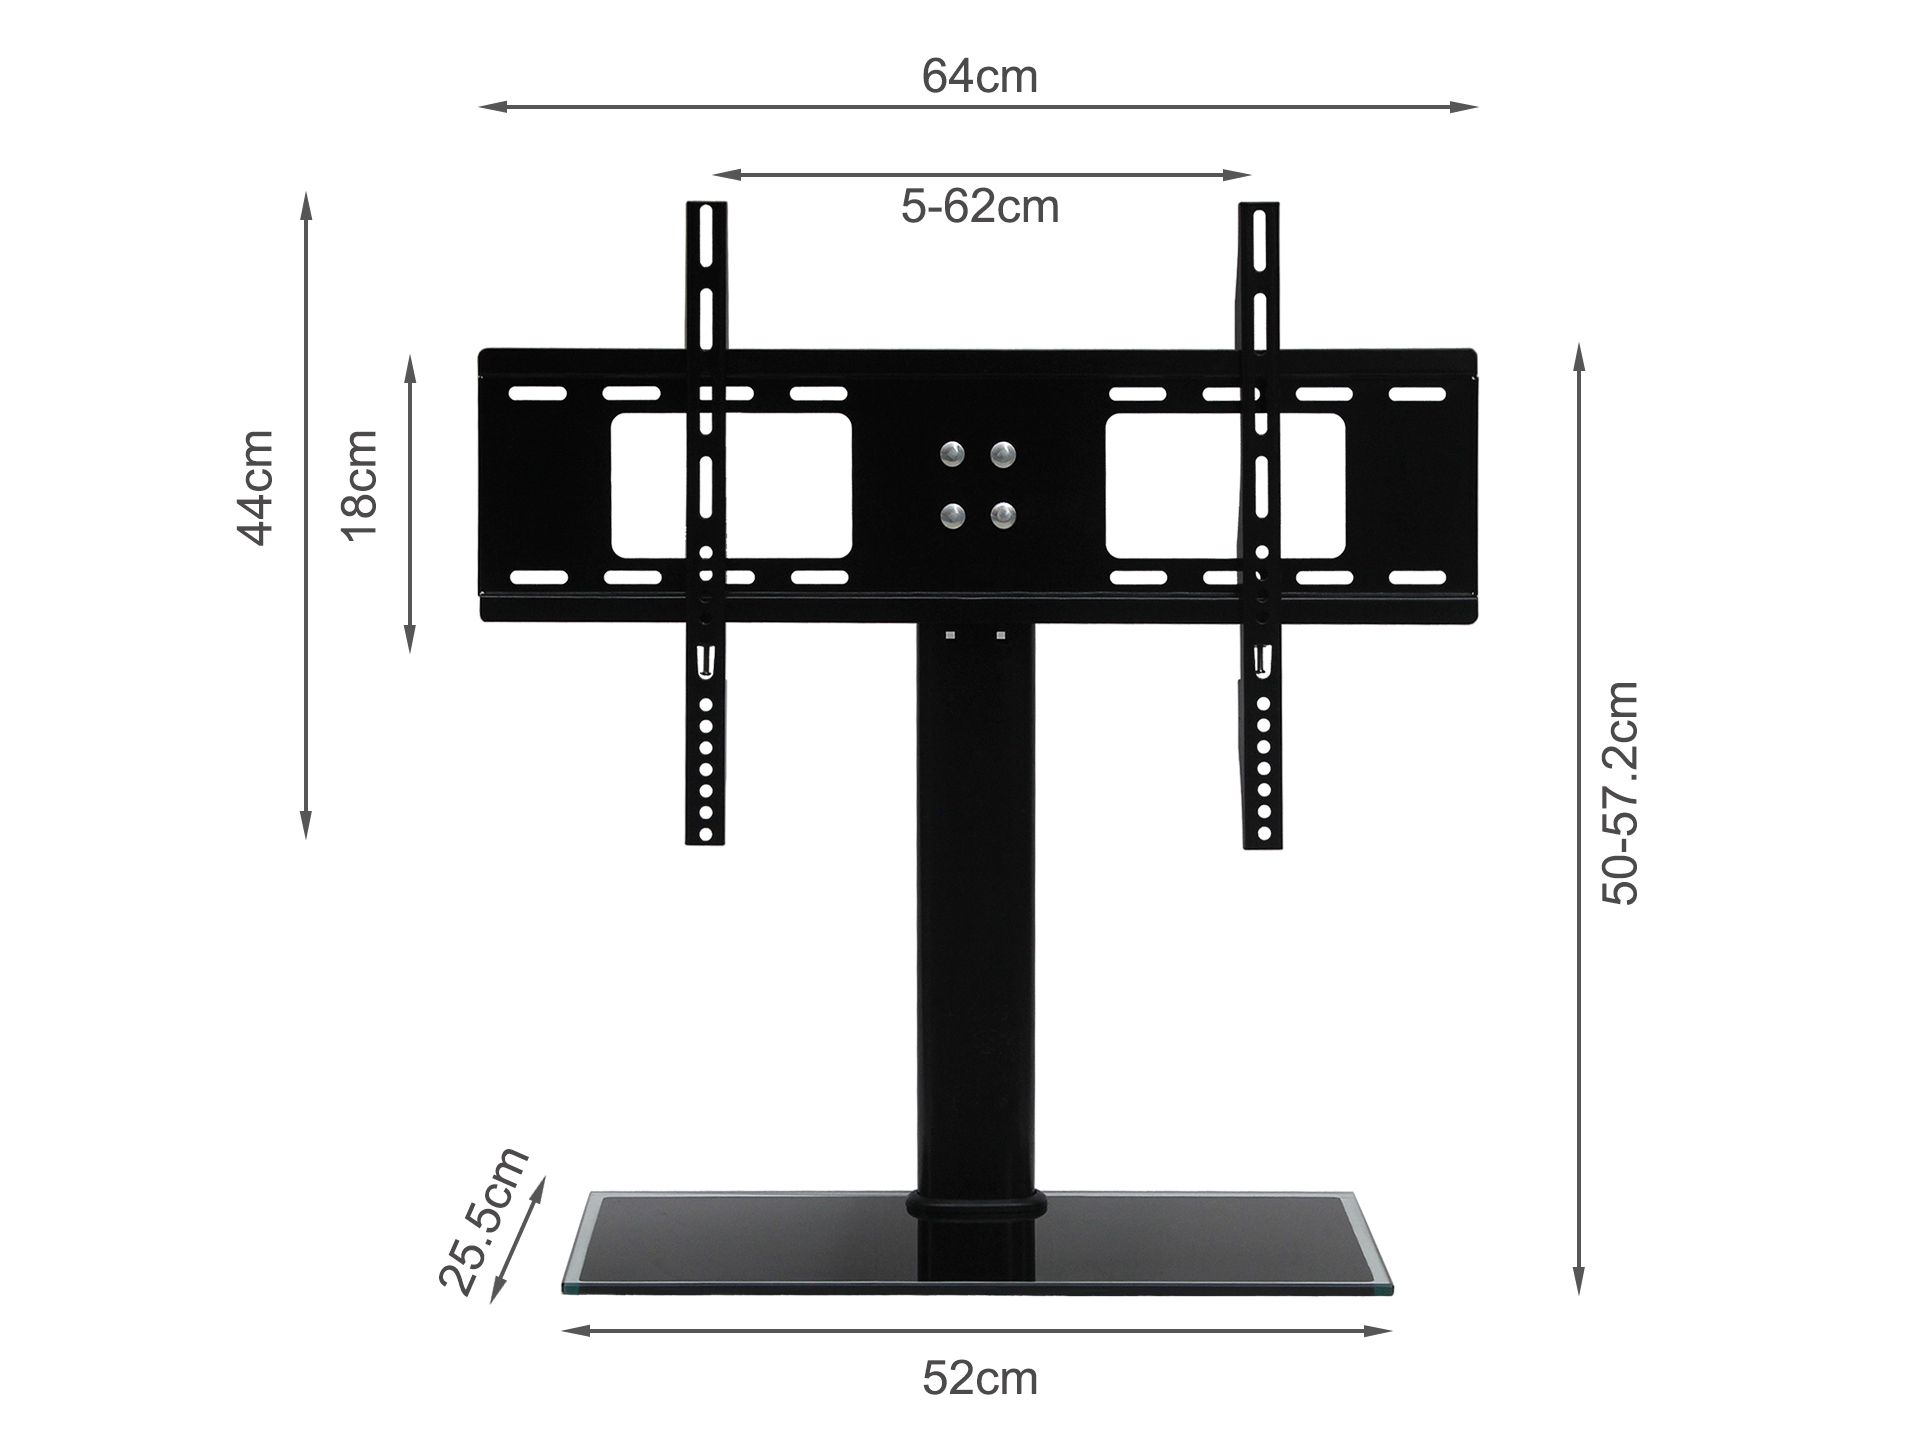 TV Stand With Glass Base Height Adjustable 32-55